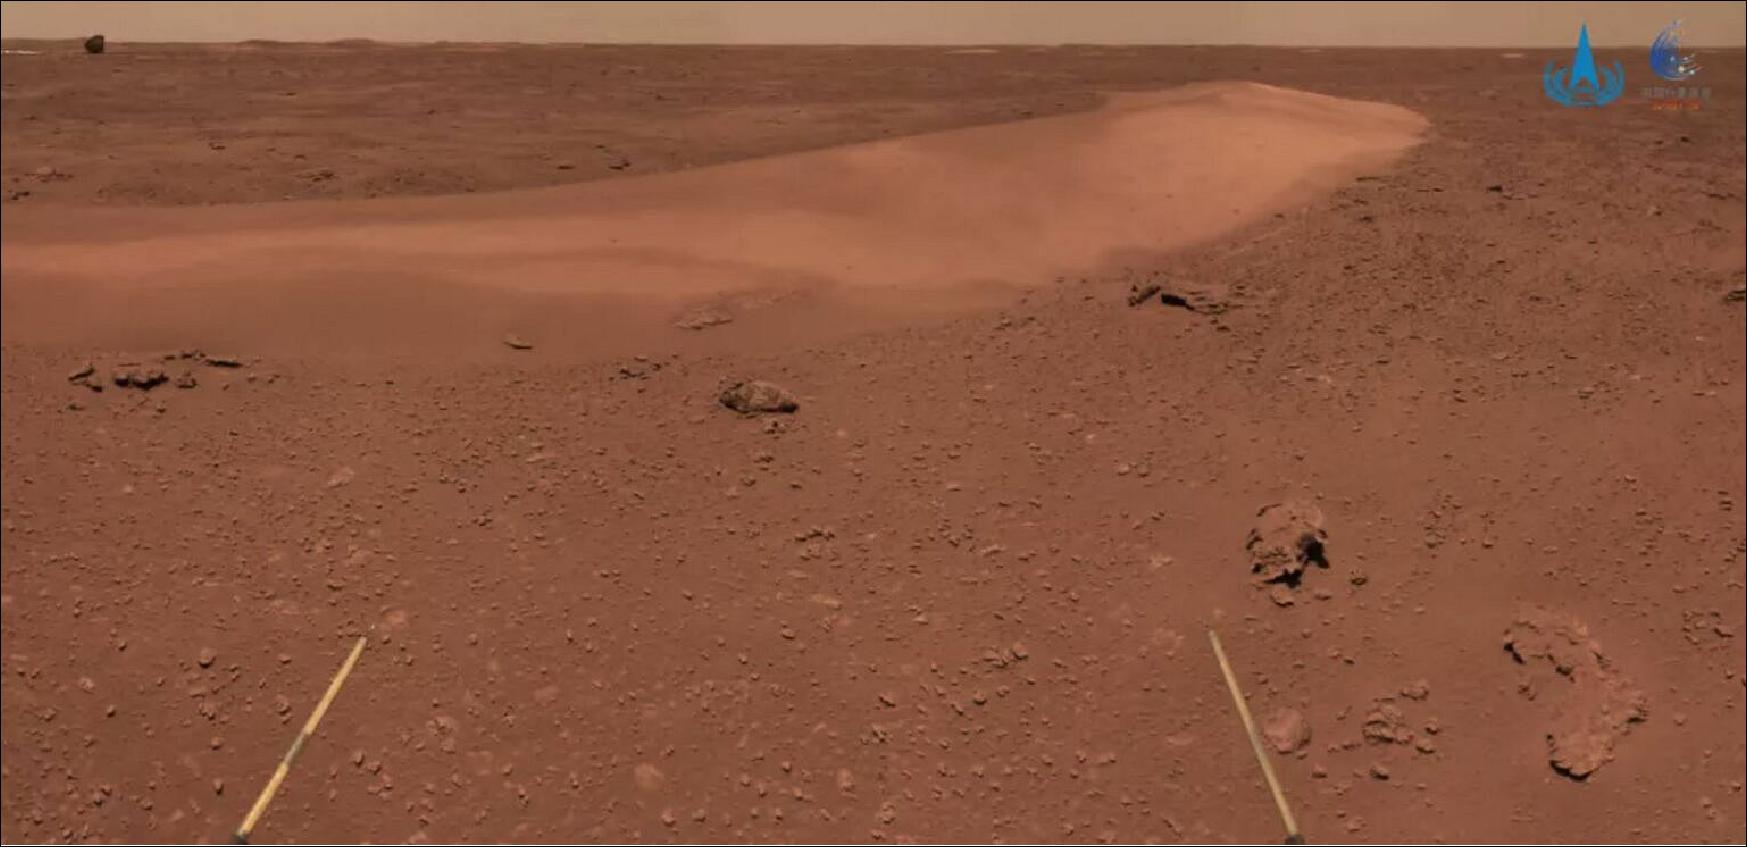 Figure 13: An image returned by Zhurong showing a dune and the distant backshell (image credit: CNSA/PEC)